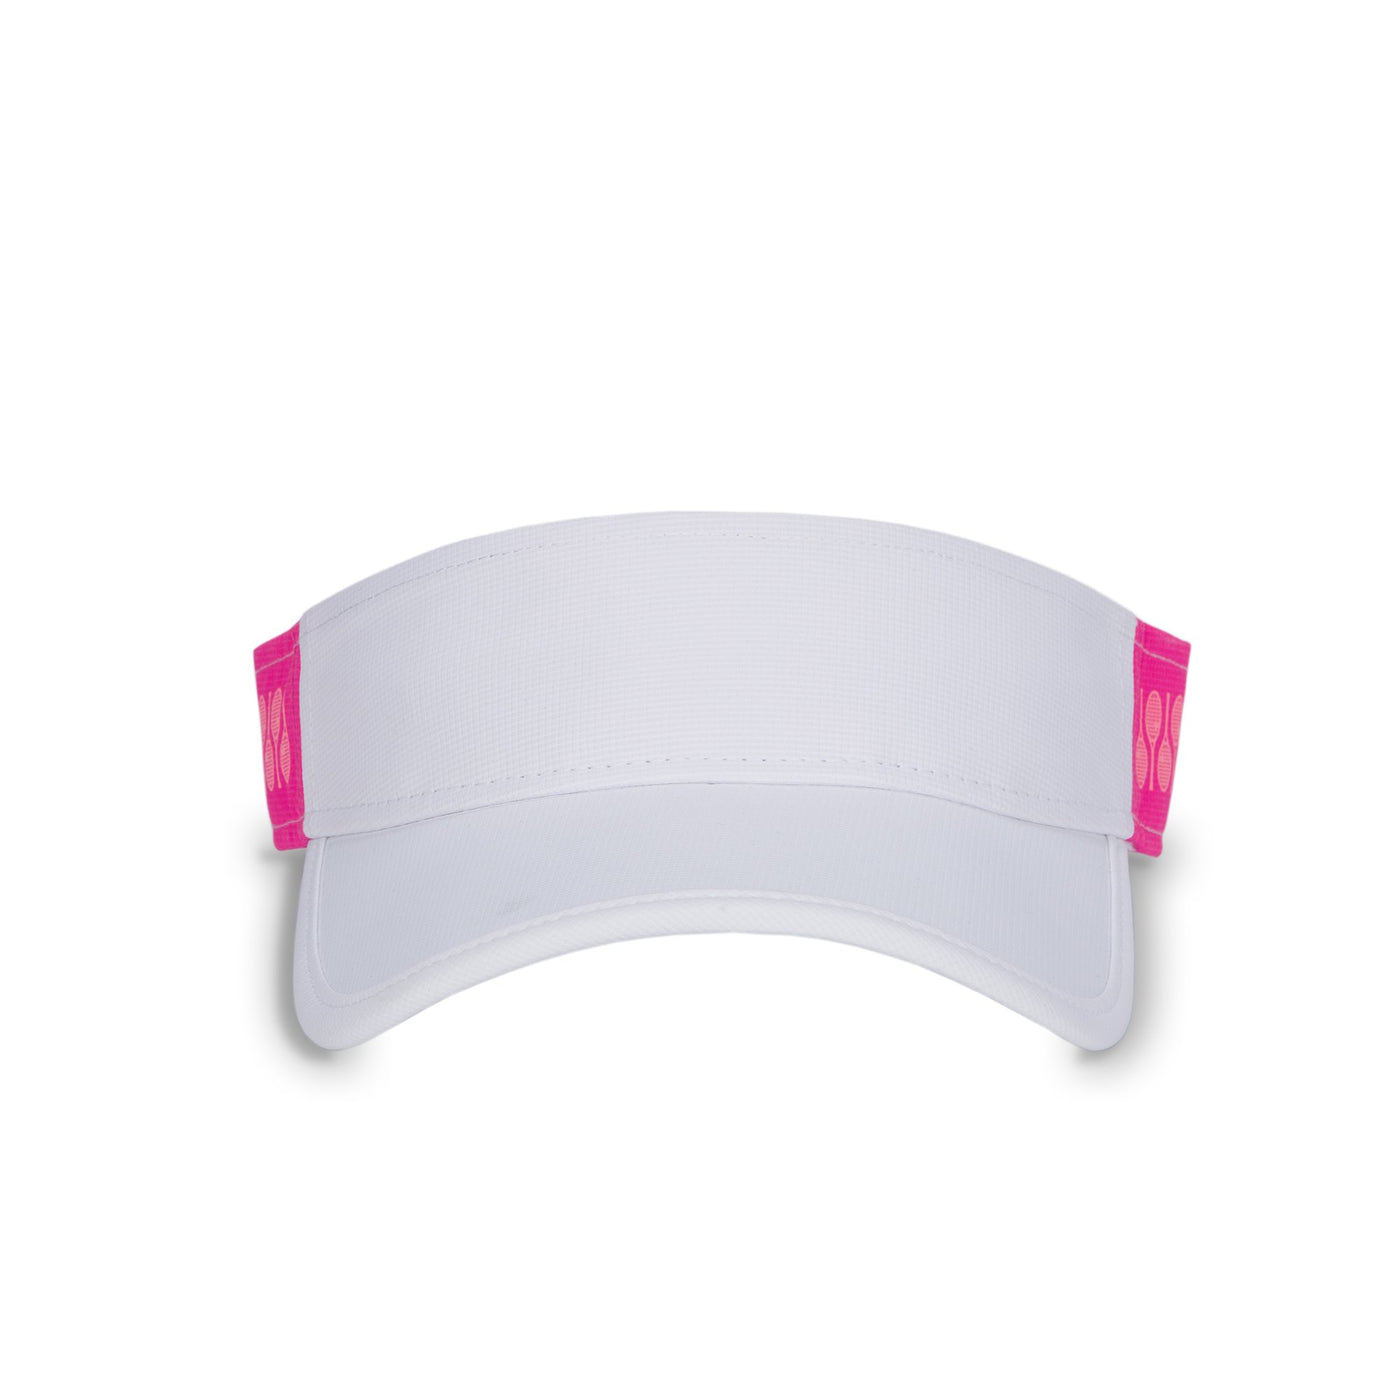 Front view of pink tonal Racquets Head in the game visor. Front of visor is white and the sides are hot pink with bright pink racquets printed.